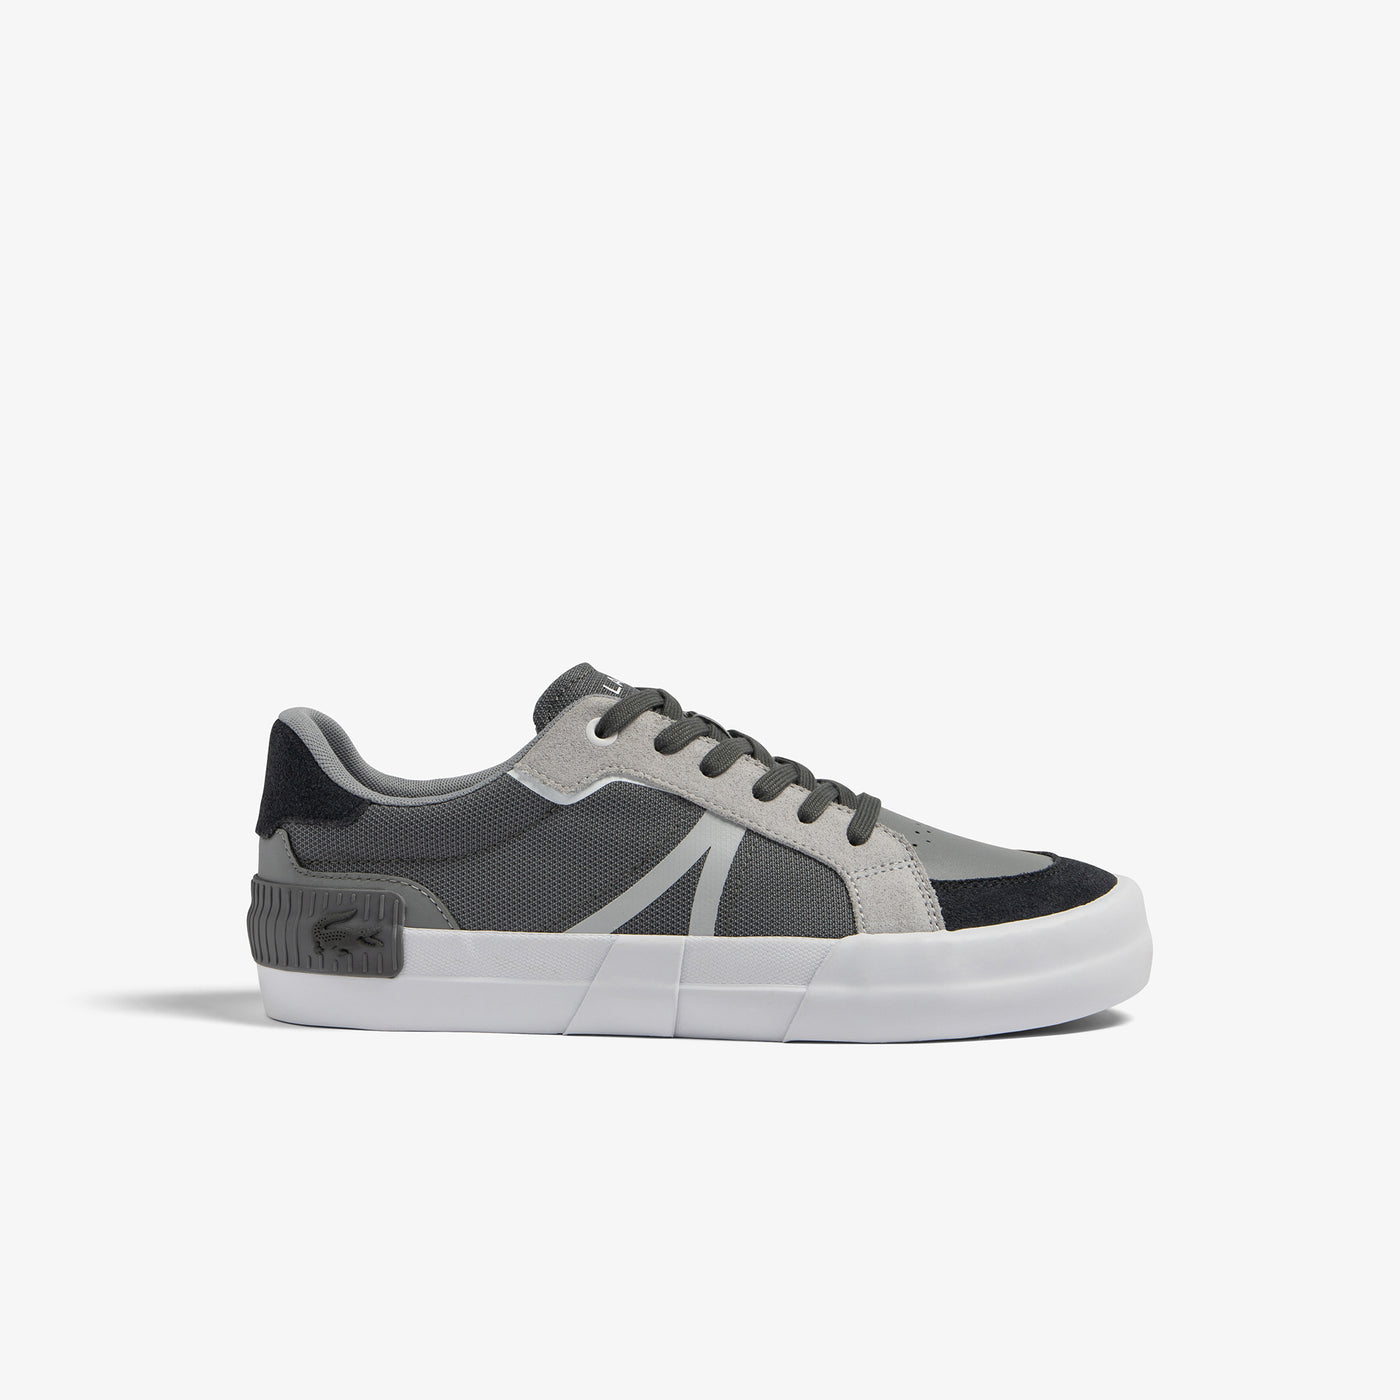 Shop The Latest Collection Of Lacoste Men'S Lacoste L004 Textile Tonal Sneakers - 45Cma0060 In Lebanon